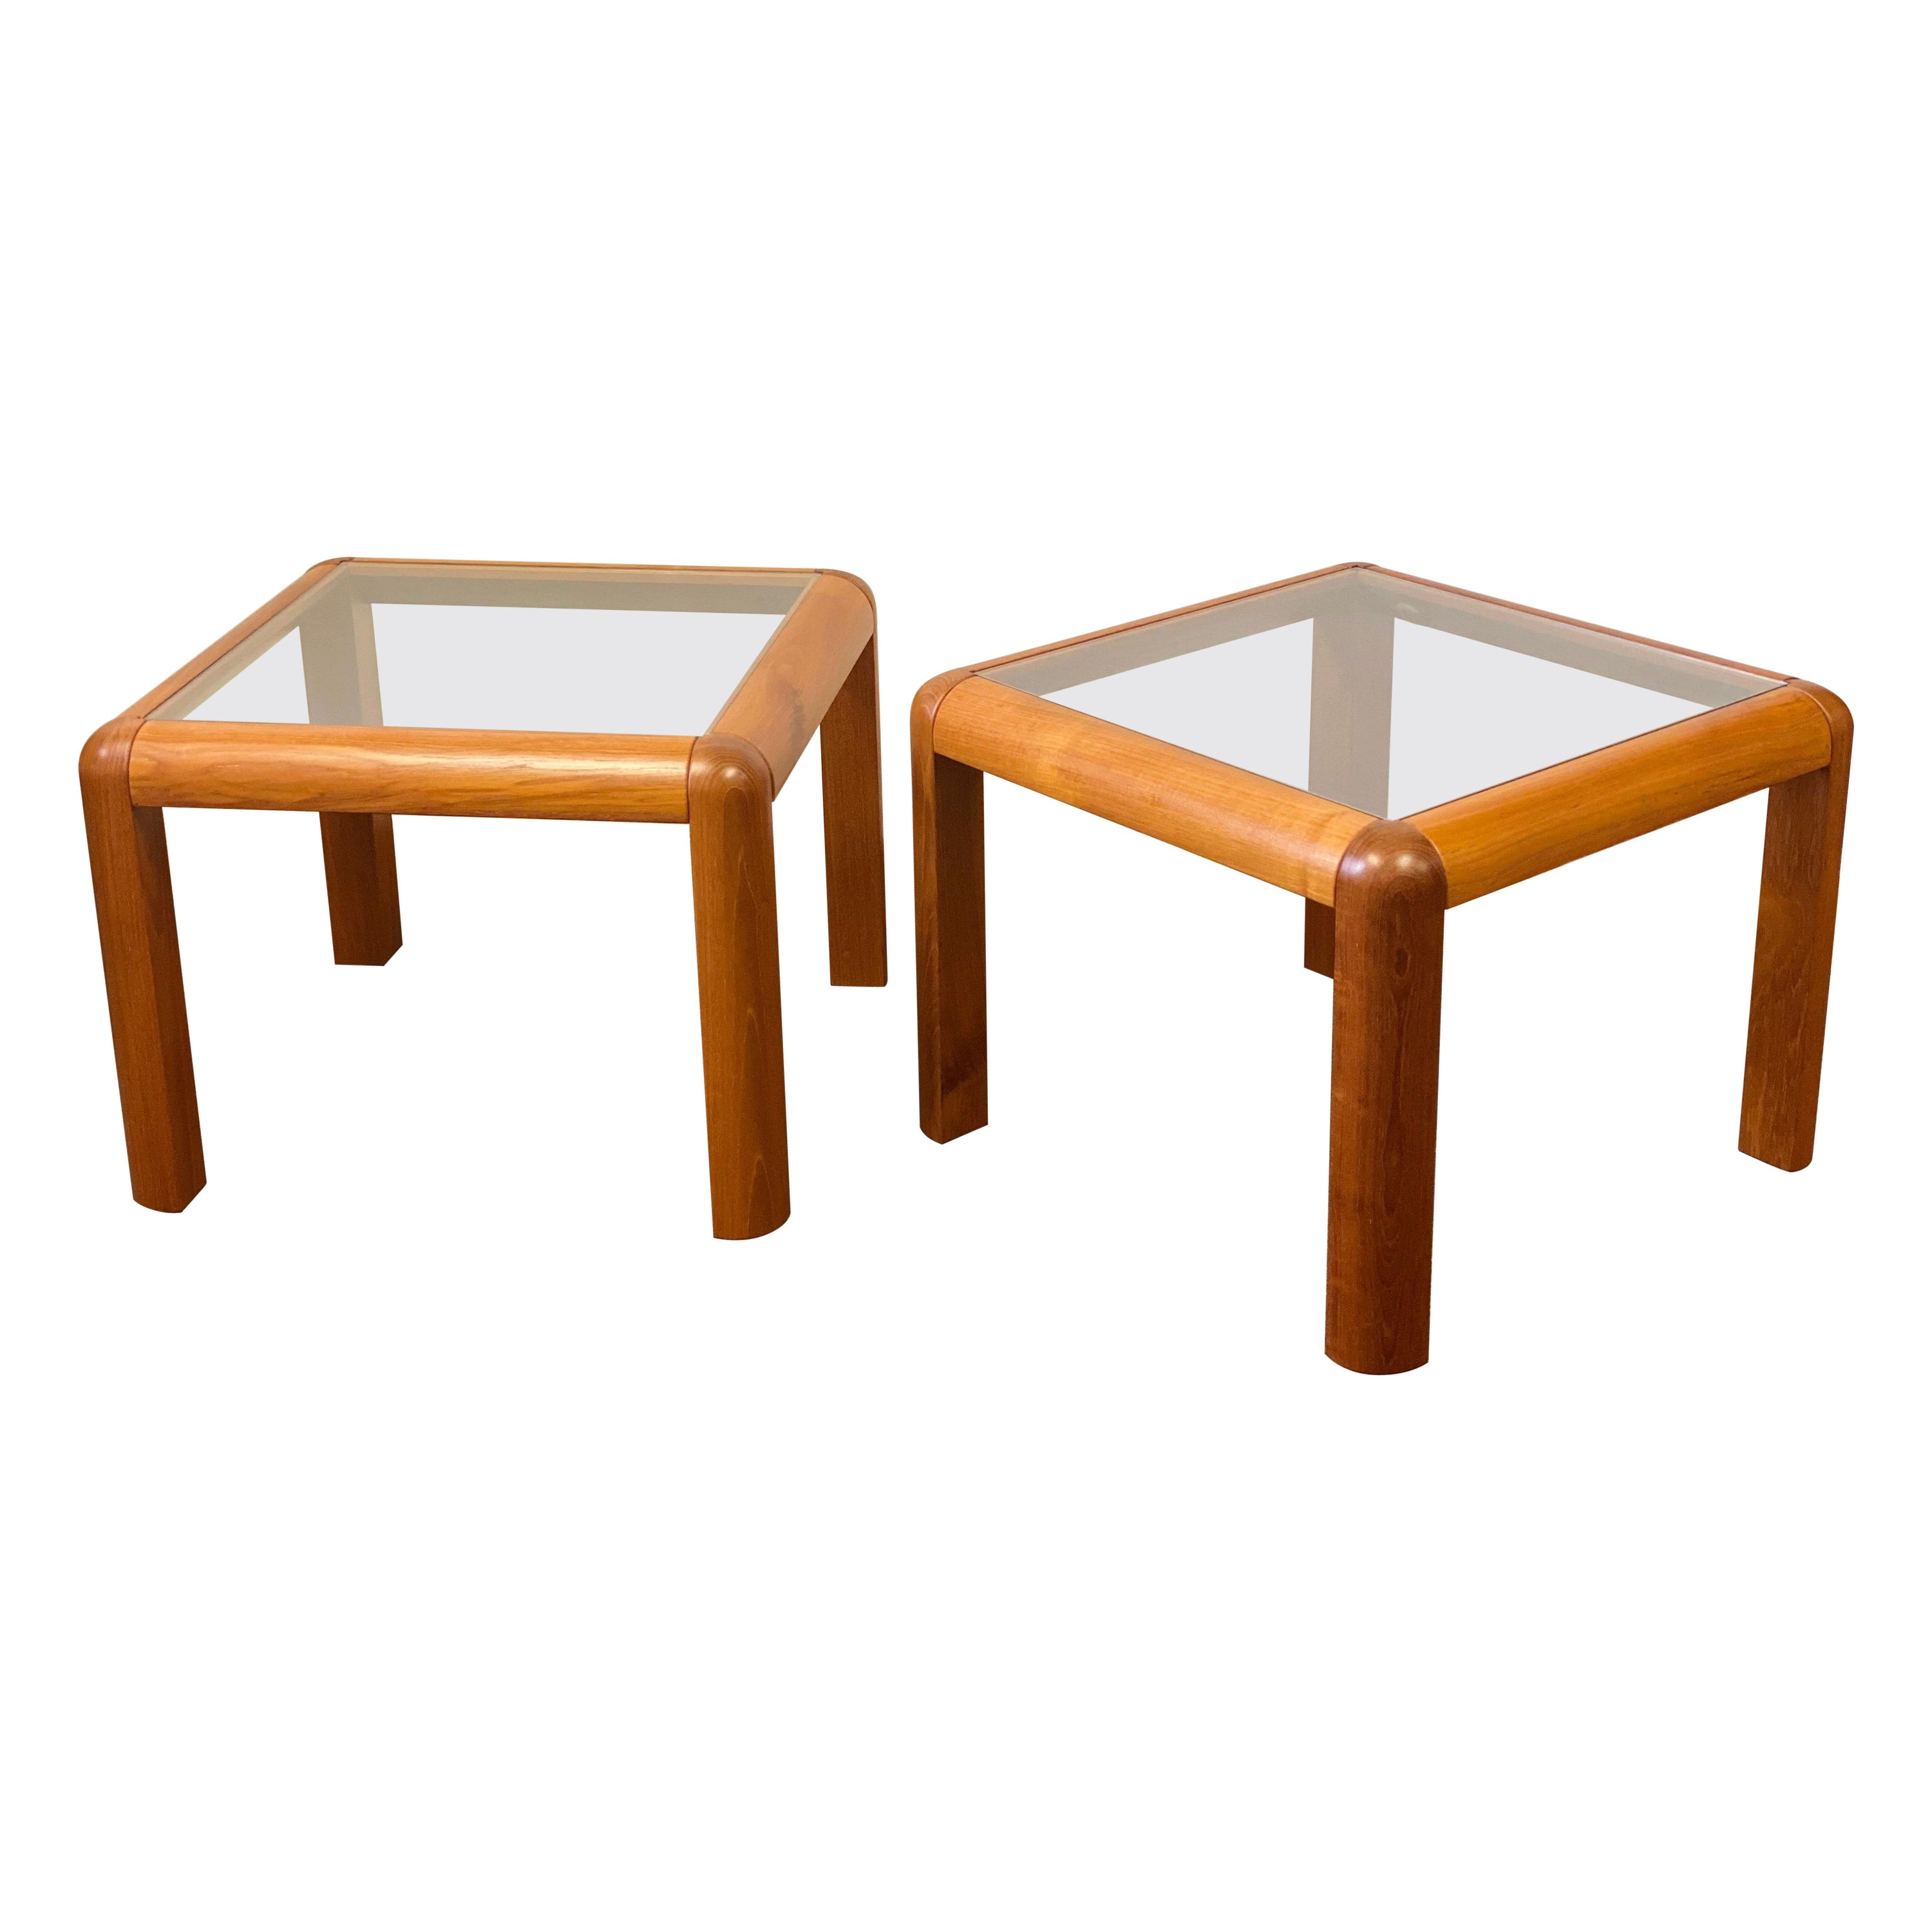 1960s Danish Trioh-Mobler Teak and Glass Square Side Tables, a Pair